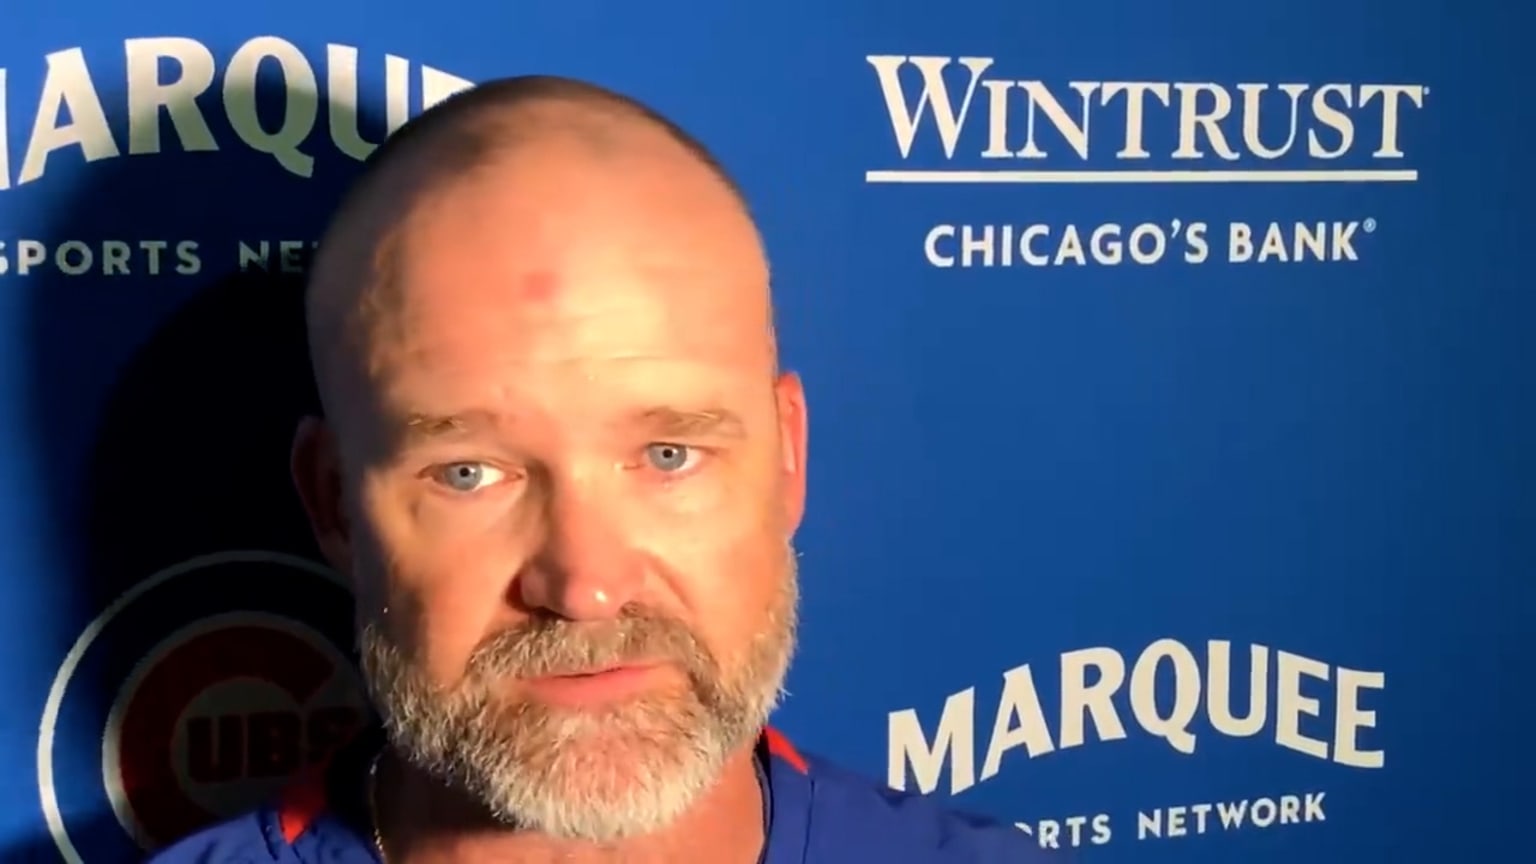 David Ross on the Cubs' win, 06/30/2023